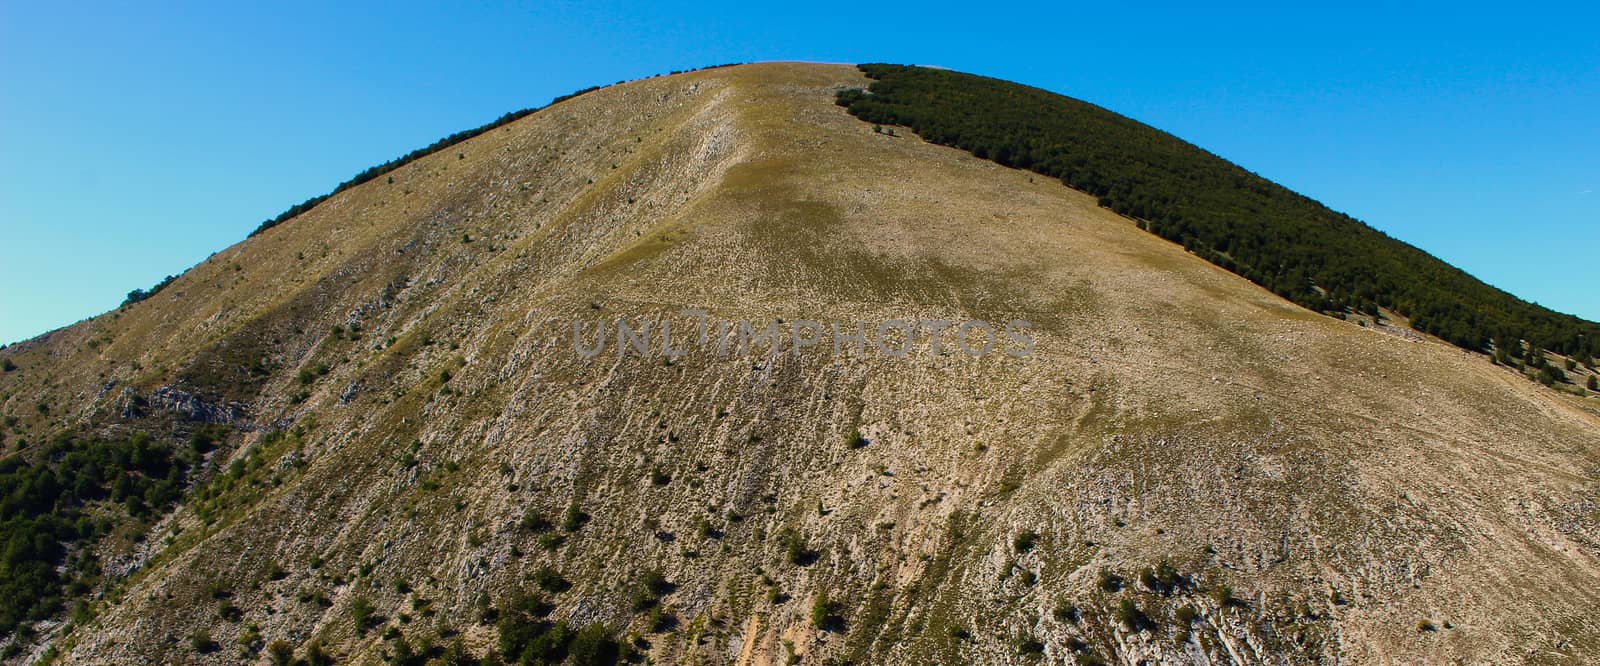 Banner of a huge hill above the old Bosnian village of Lukomir, which is quite devoid of vegetation due to soil erosion. Bjelasnica Mountain, Bosnia and Herzegovina.